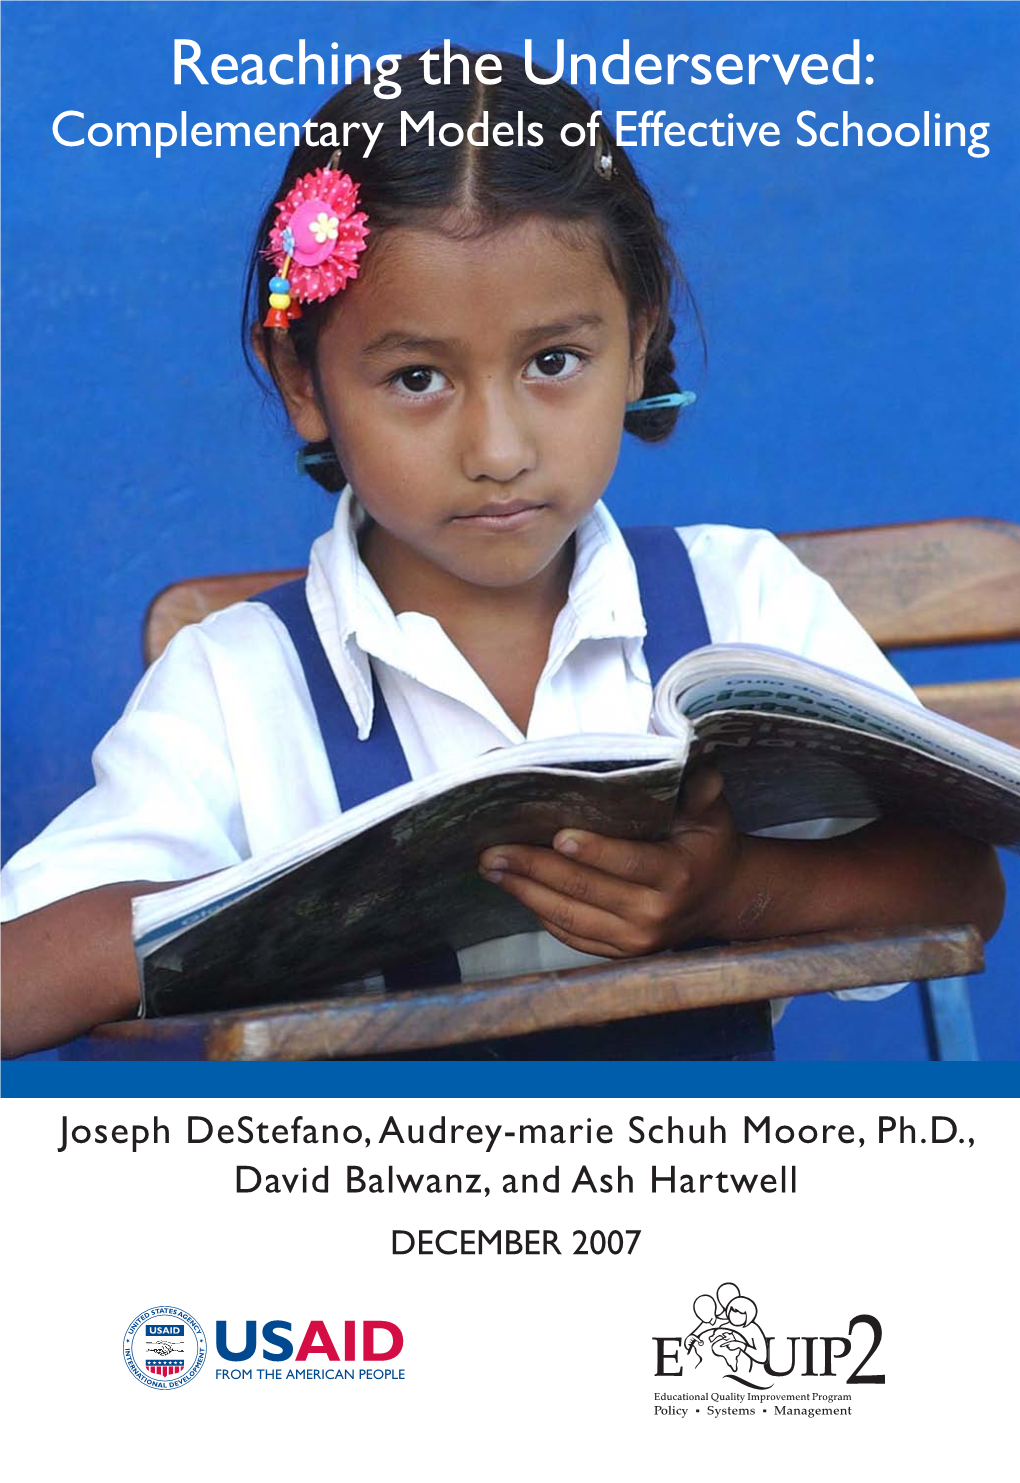 Reaching the Underserved: Complementary Models of Effective Schooling